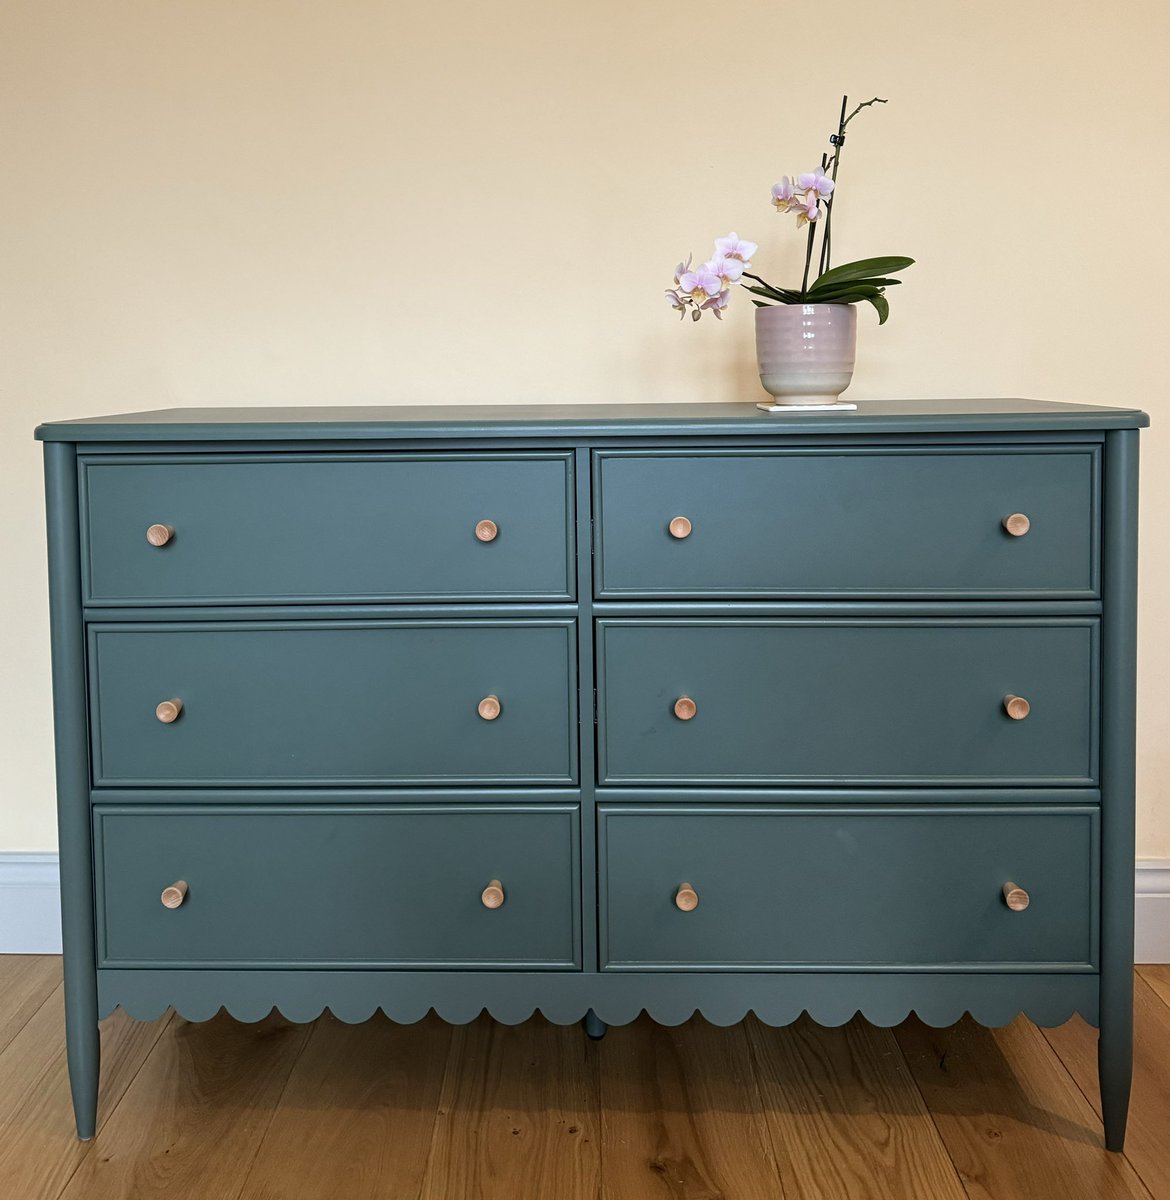 It took (the man from @Taskrabbit) hours to build these new drawers for the guest room.